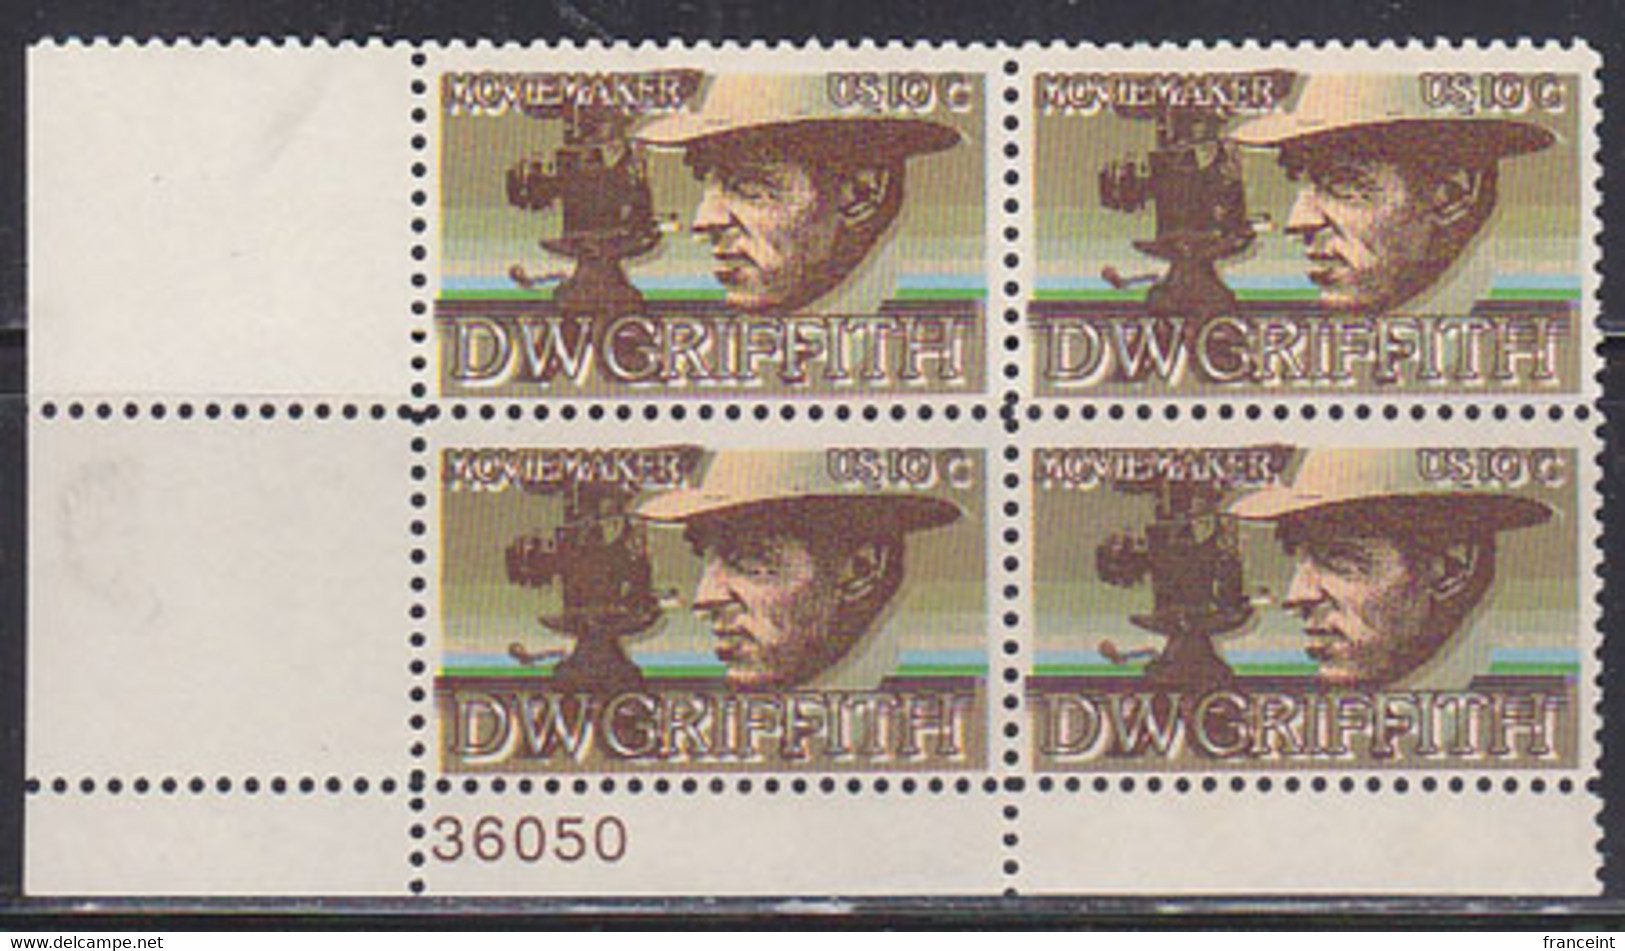 U.S.A. (1975)  D.W. Griffith. Camera. Shift Of The Color Dark Brown In A Plate Block Of 4 -> A Double Image. Scott 1555 - Errors, Freaks & Oddities (EFOs)